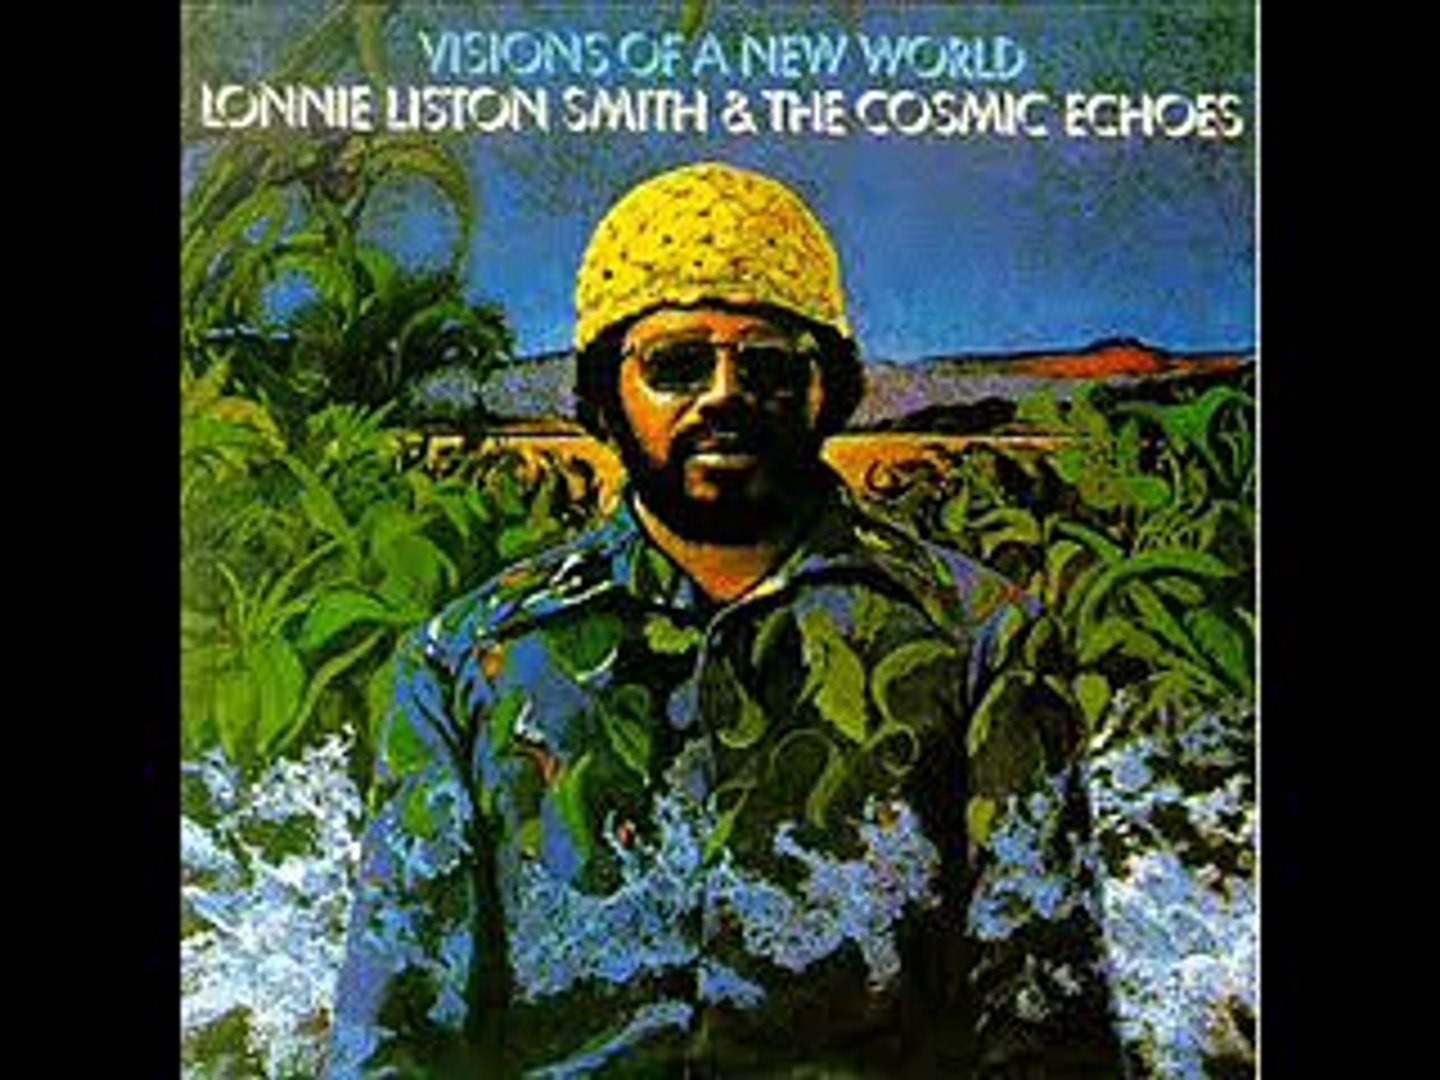 Lonnie Liston Smith - Visions of a new world (Phase I & II) - video  Dailymotion